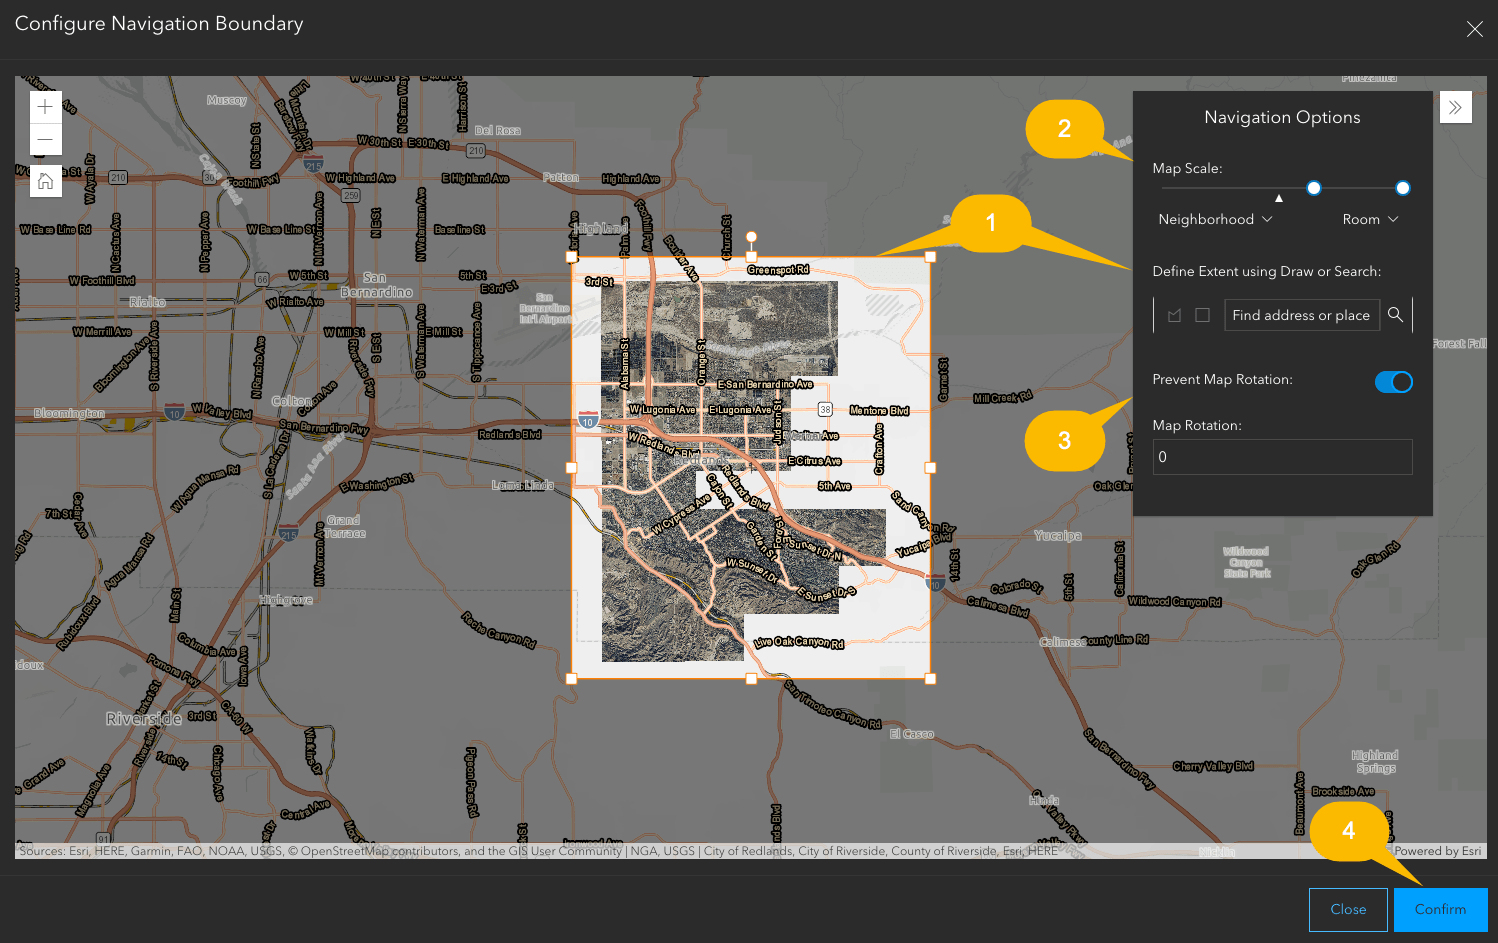 Image of the Configure Navigation Boundary window with available options labeled with numbers